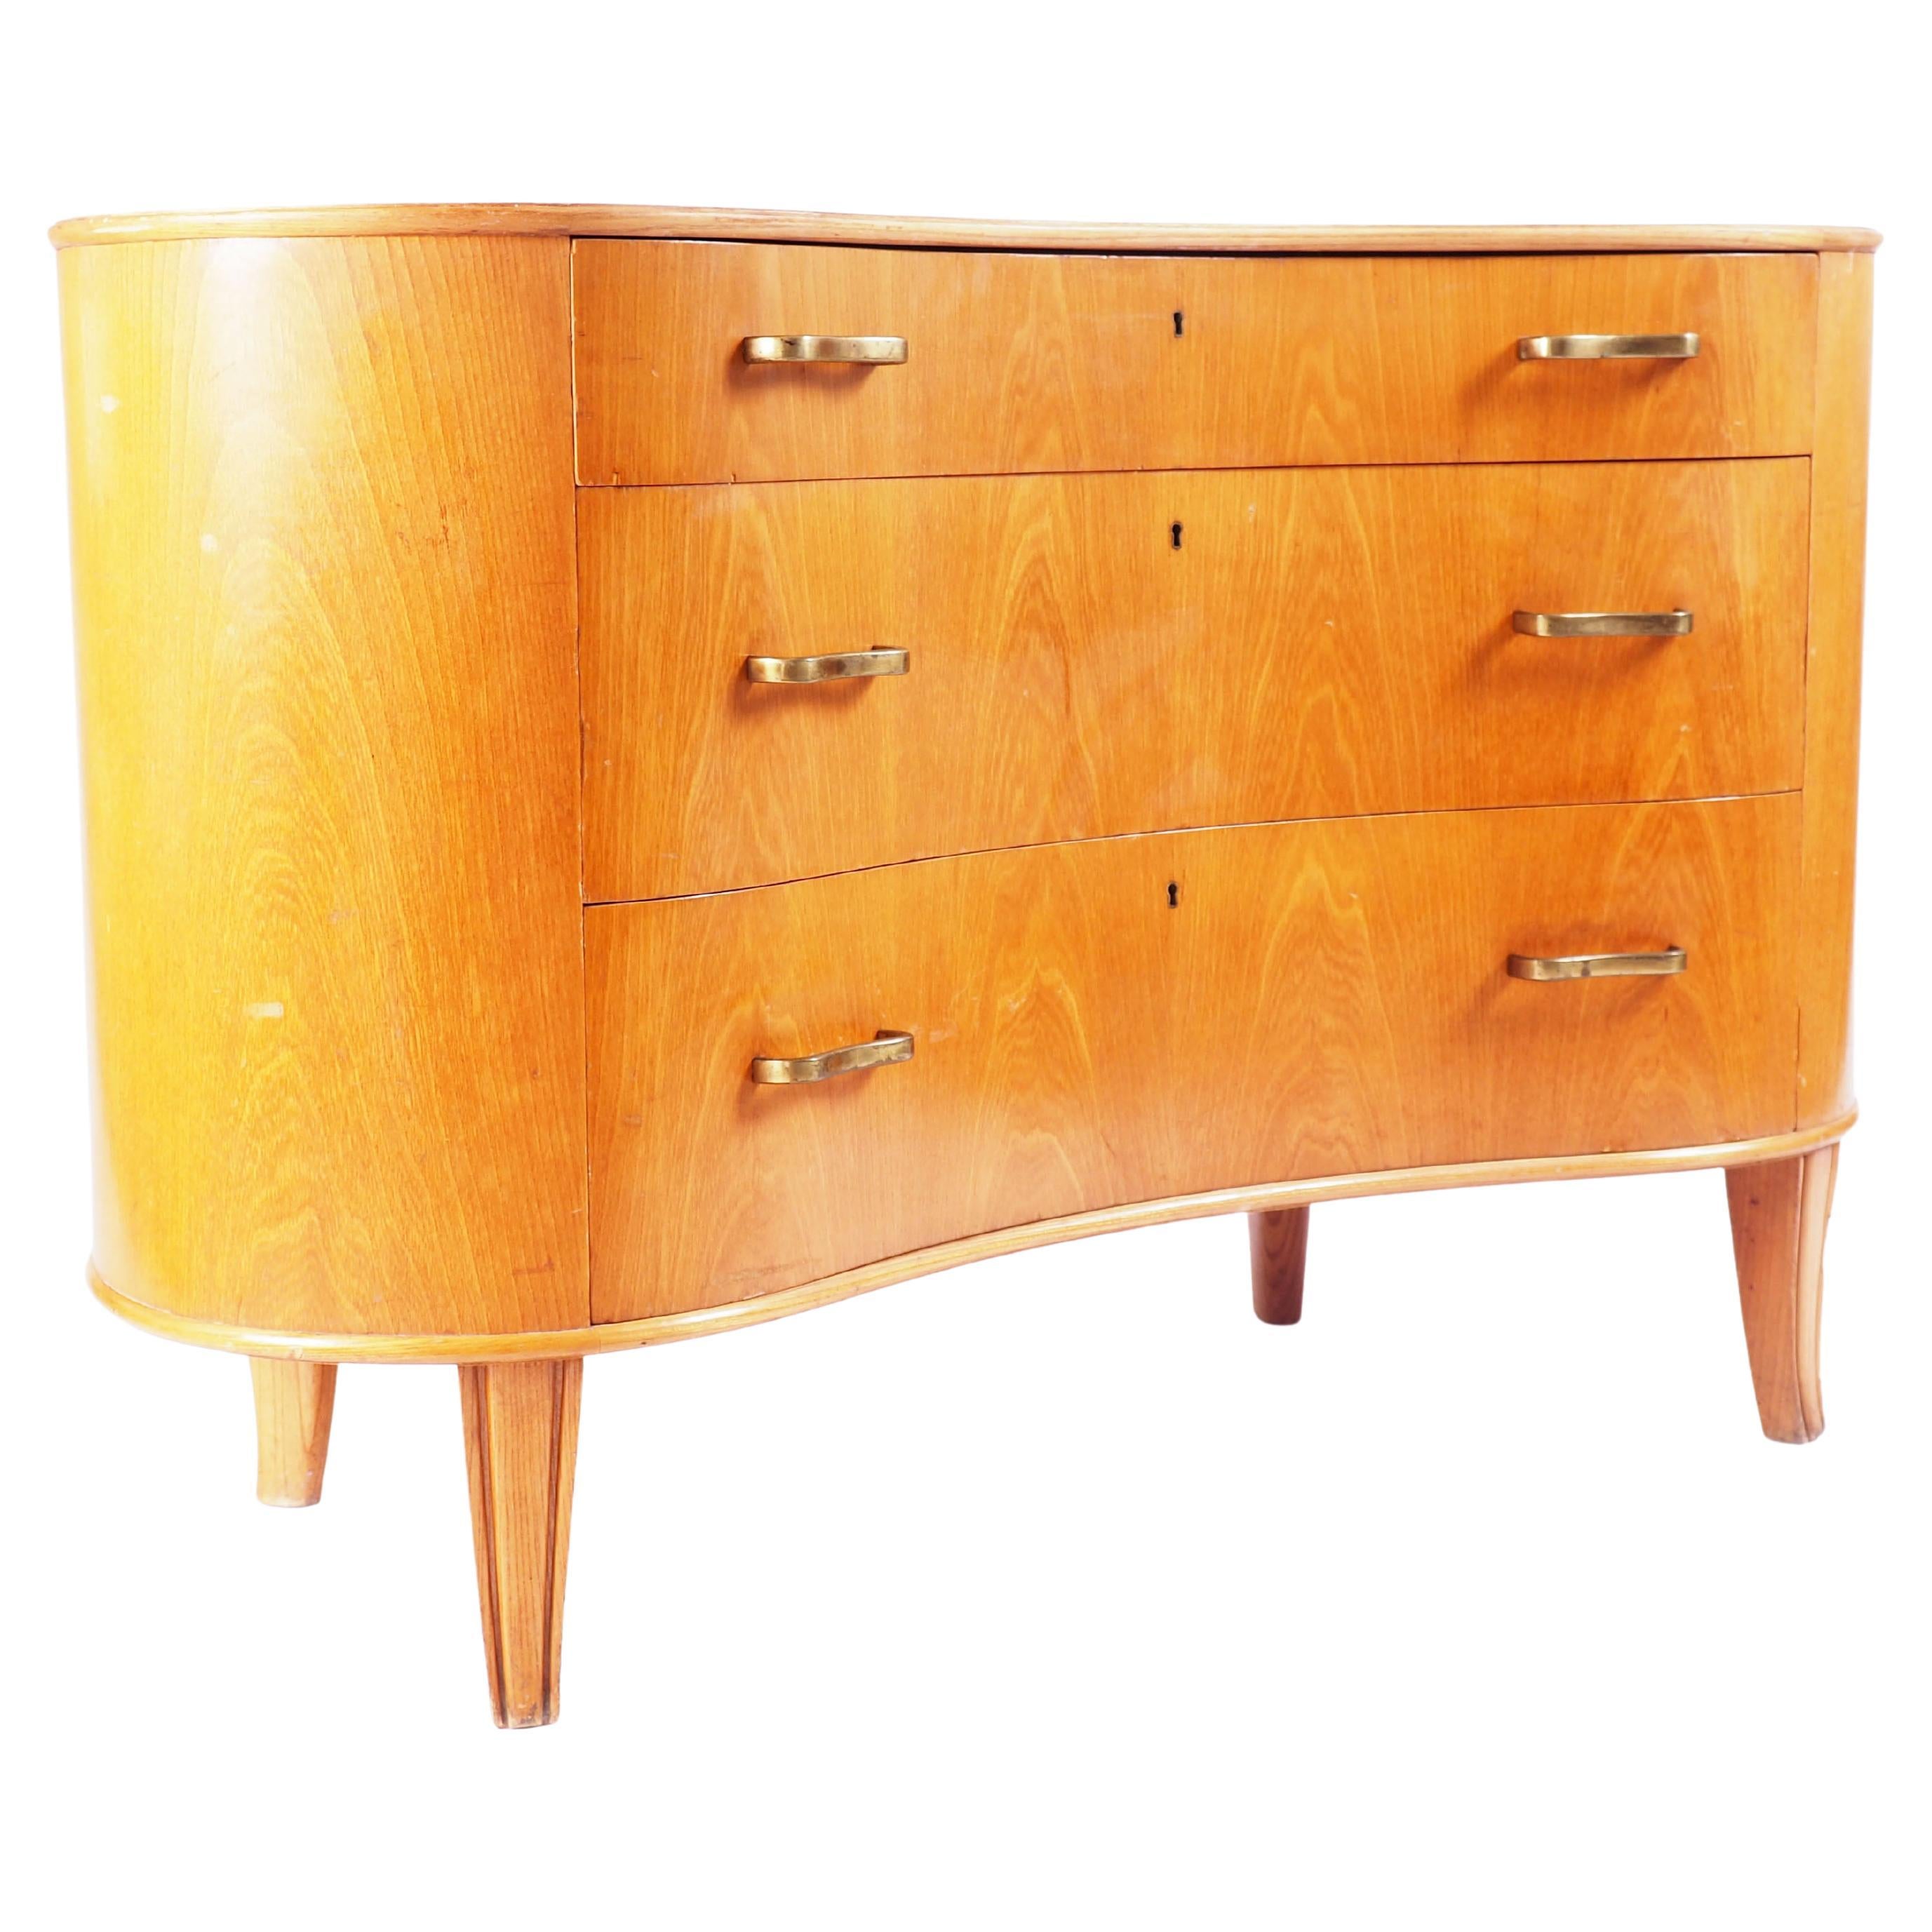 Axel Larsson Kidney Shaped Chest of Drawers Made by Bodafors, Sweden